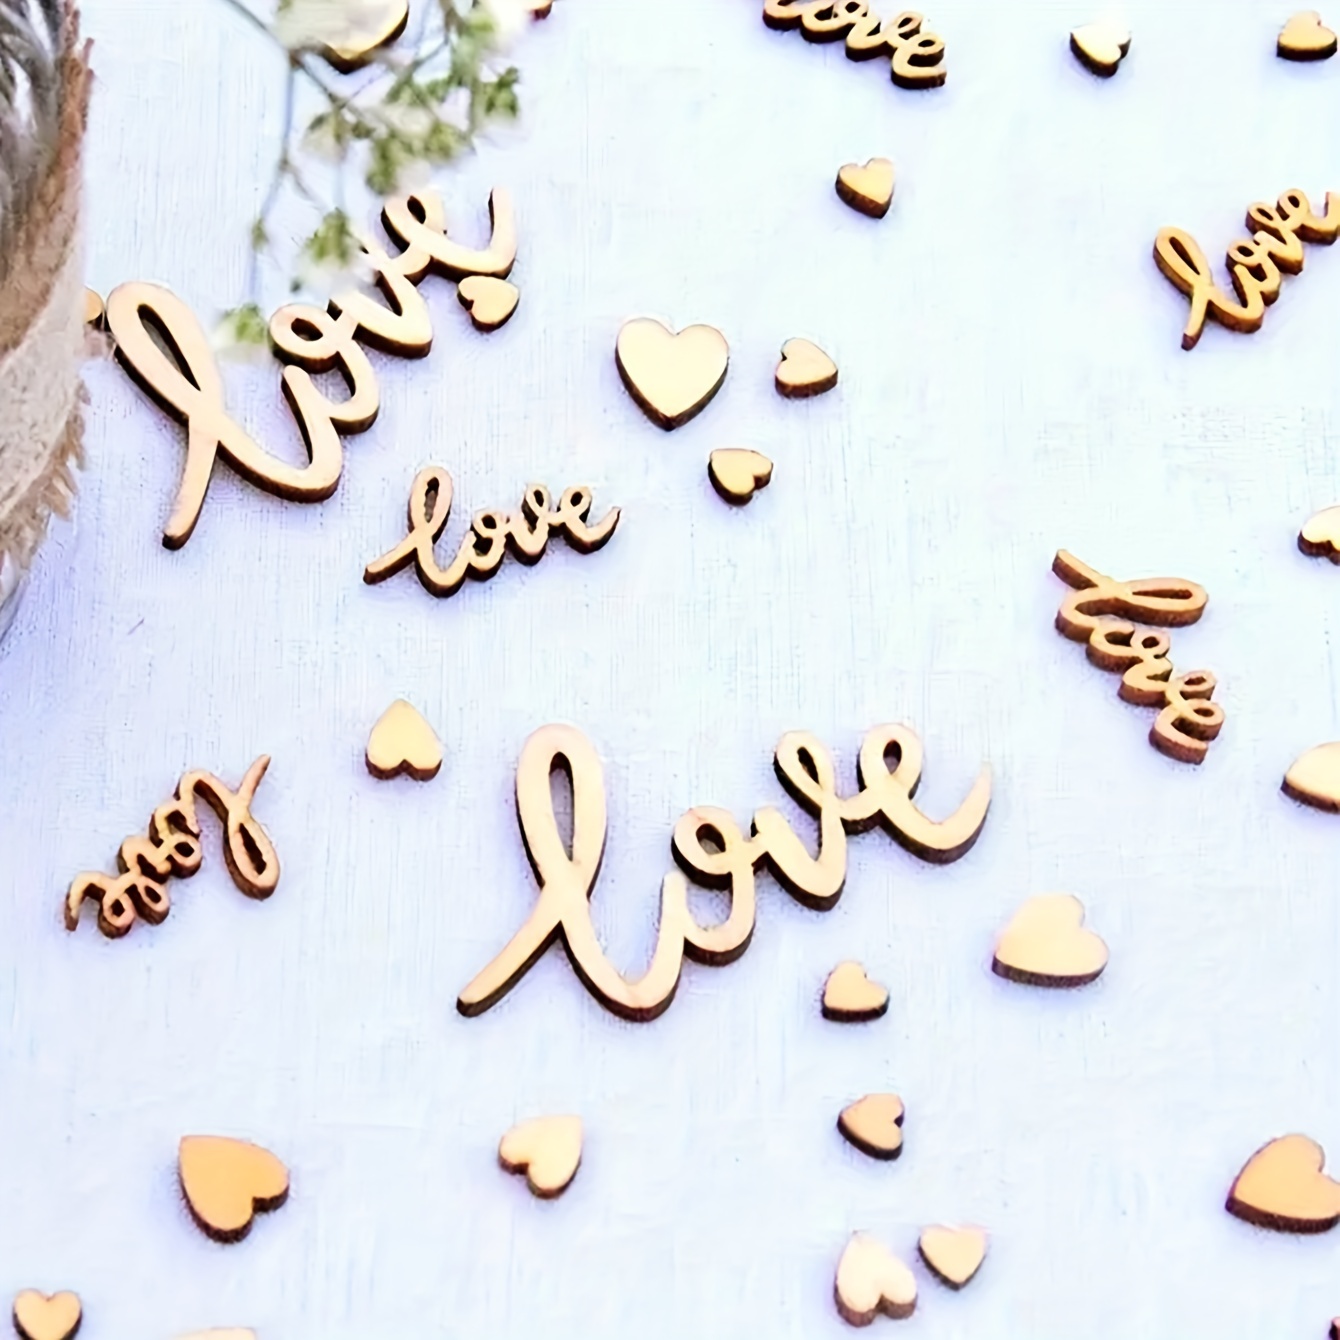 

100pcs/pack Wooden Love Confetti And Hearts, Mixed Natural Rustic Wedding Table Decorations, Diy Cutouts Crafts Easter Gift